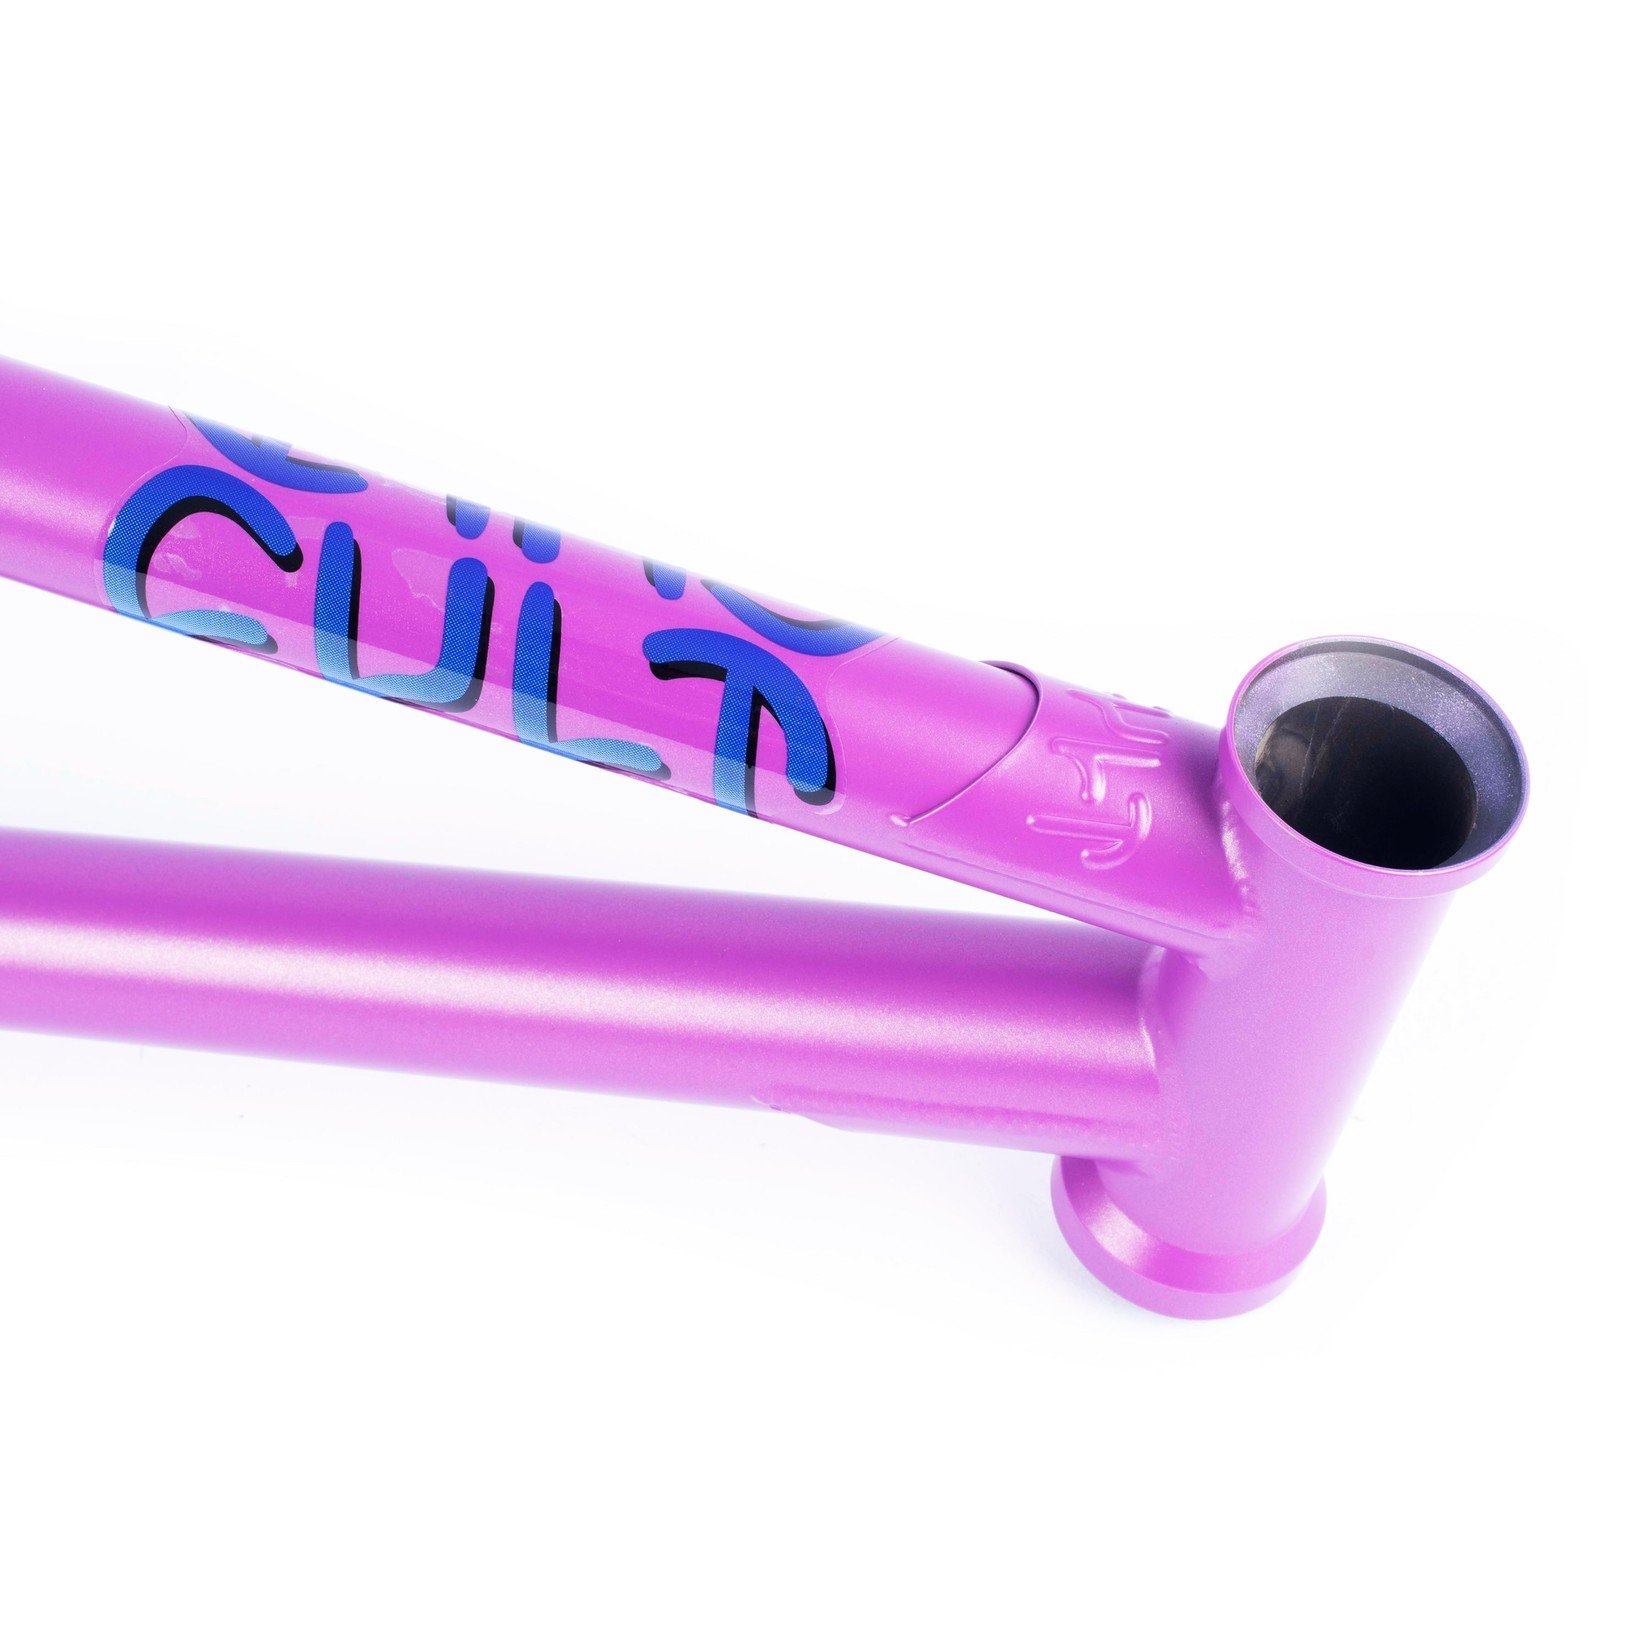 Cult Cult - 2Short - Panza frame - Purps